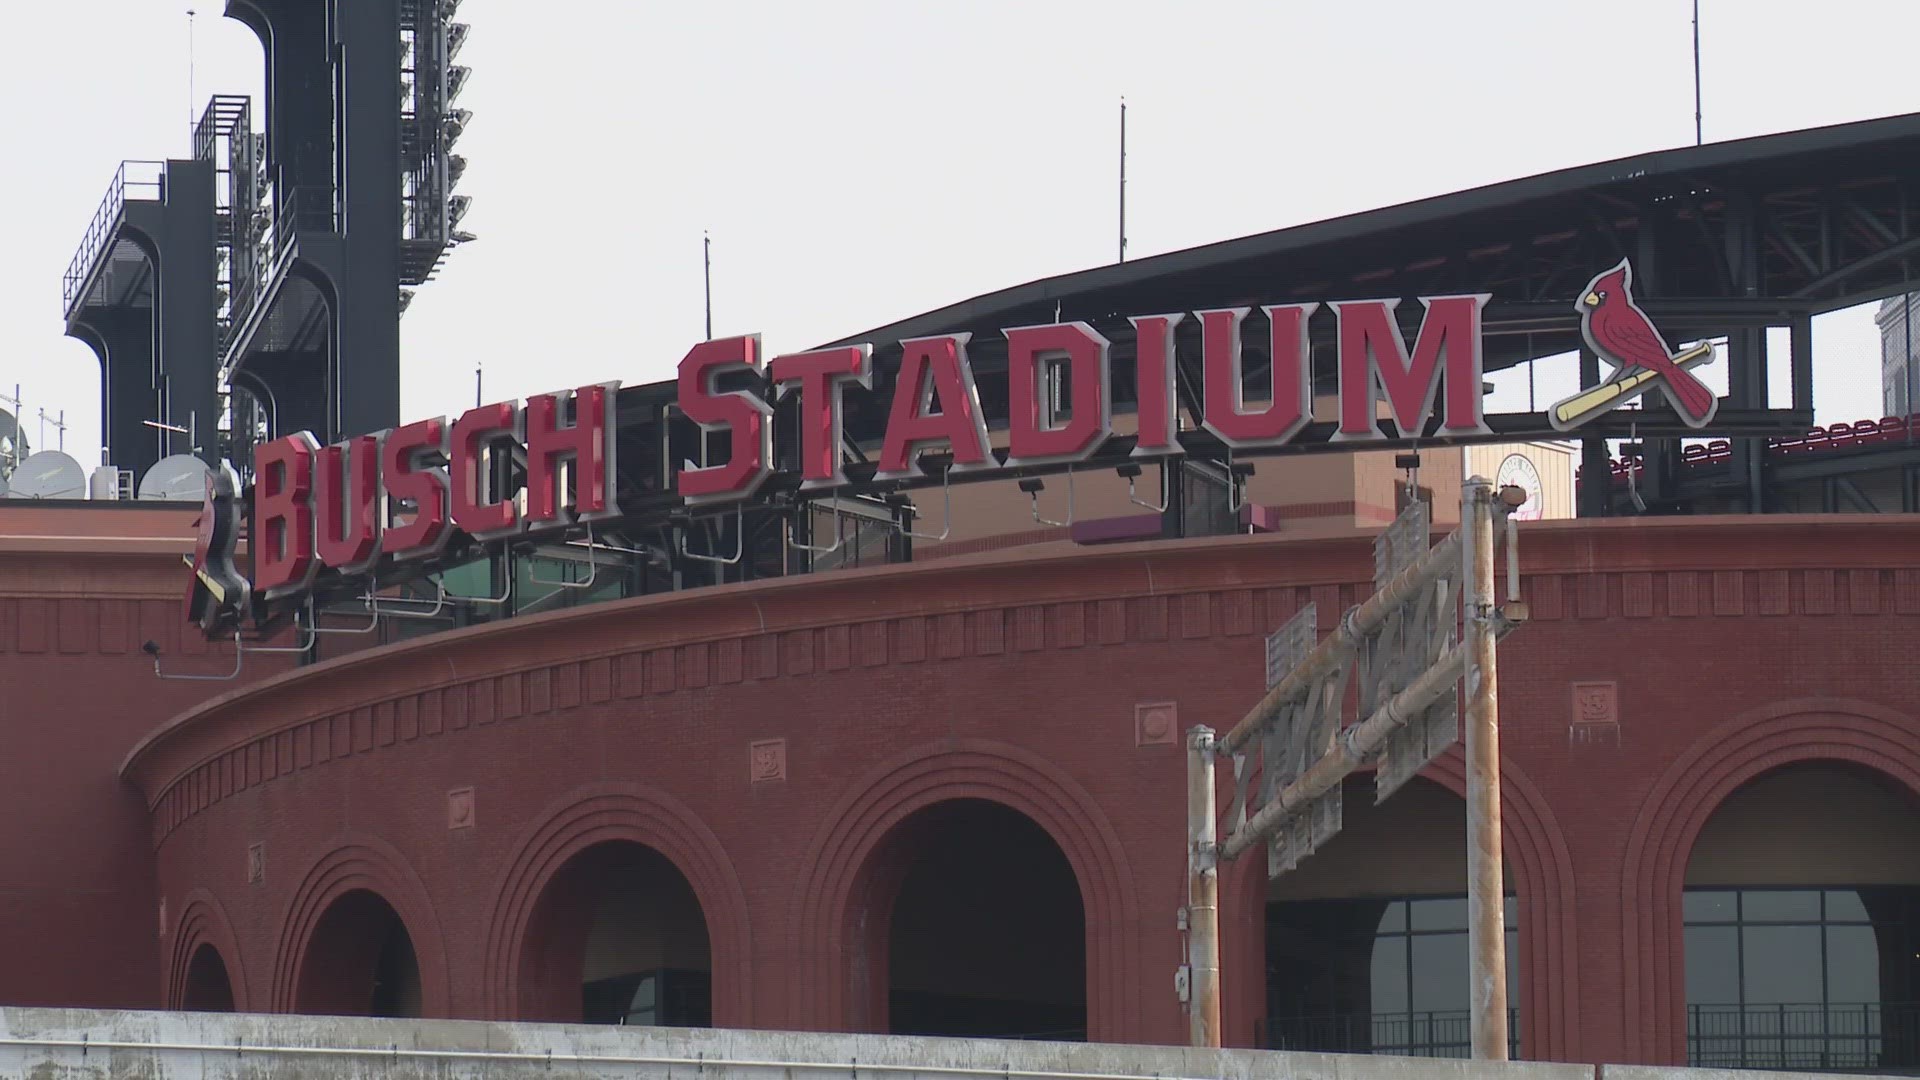 While you're out having a blast at Busch Stadium, St. Louis police said your safety is their top priority. Their biggest concern is car break-ins.